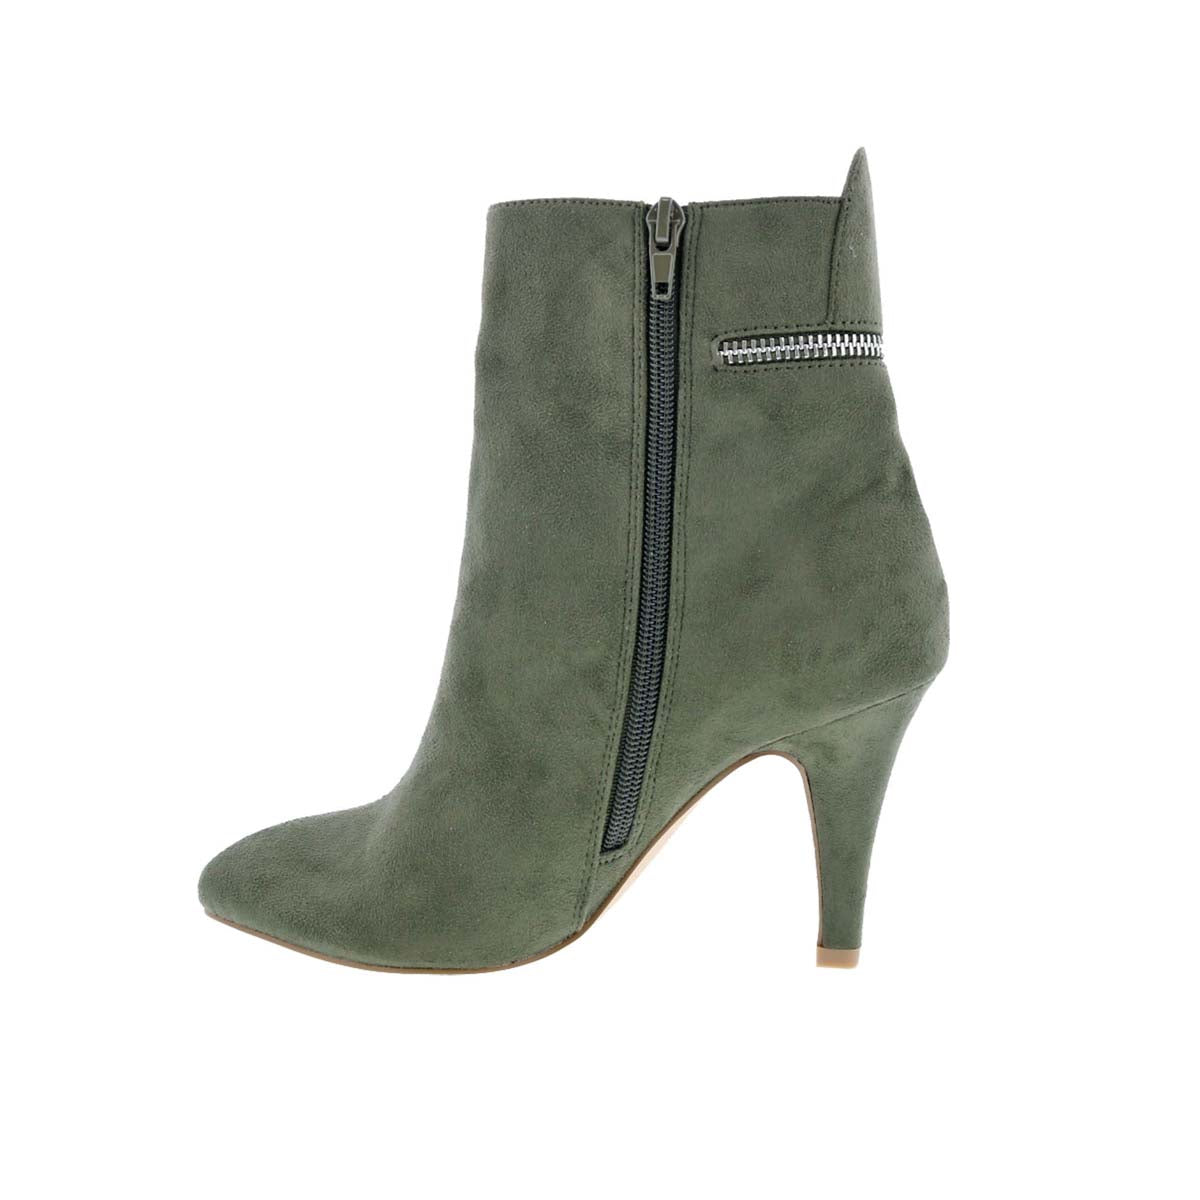 BELLINI CLAUDIA WOMEN BOOTS IN OLIVE MICROSUEDE - TLW Shoes